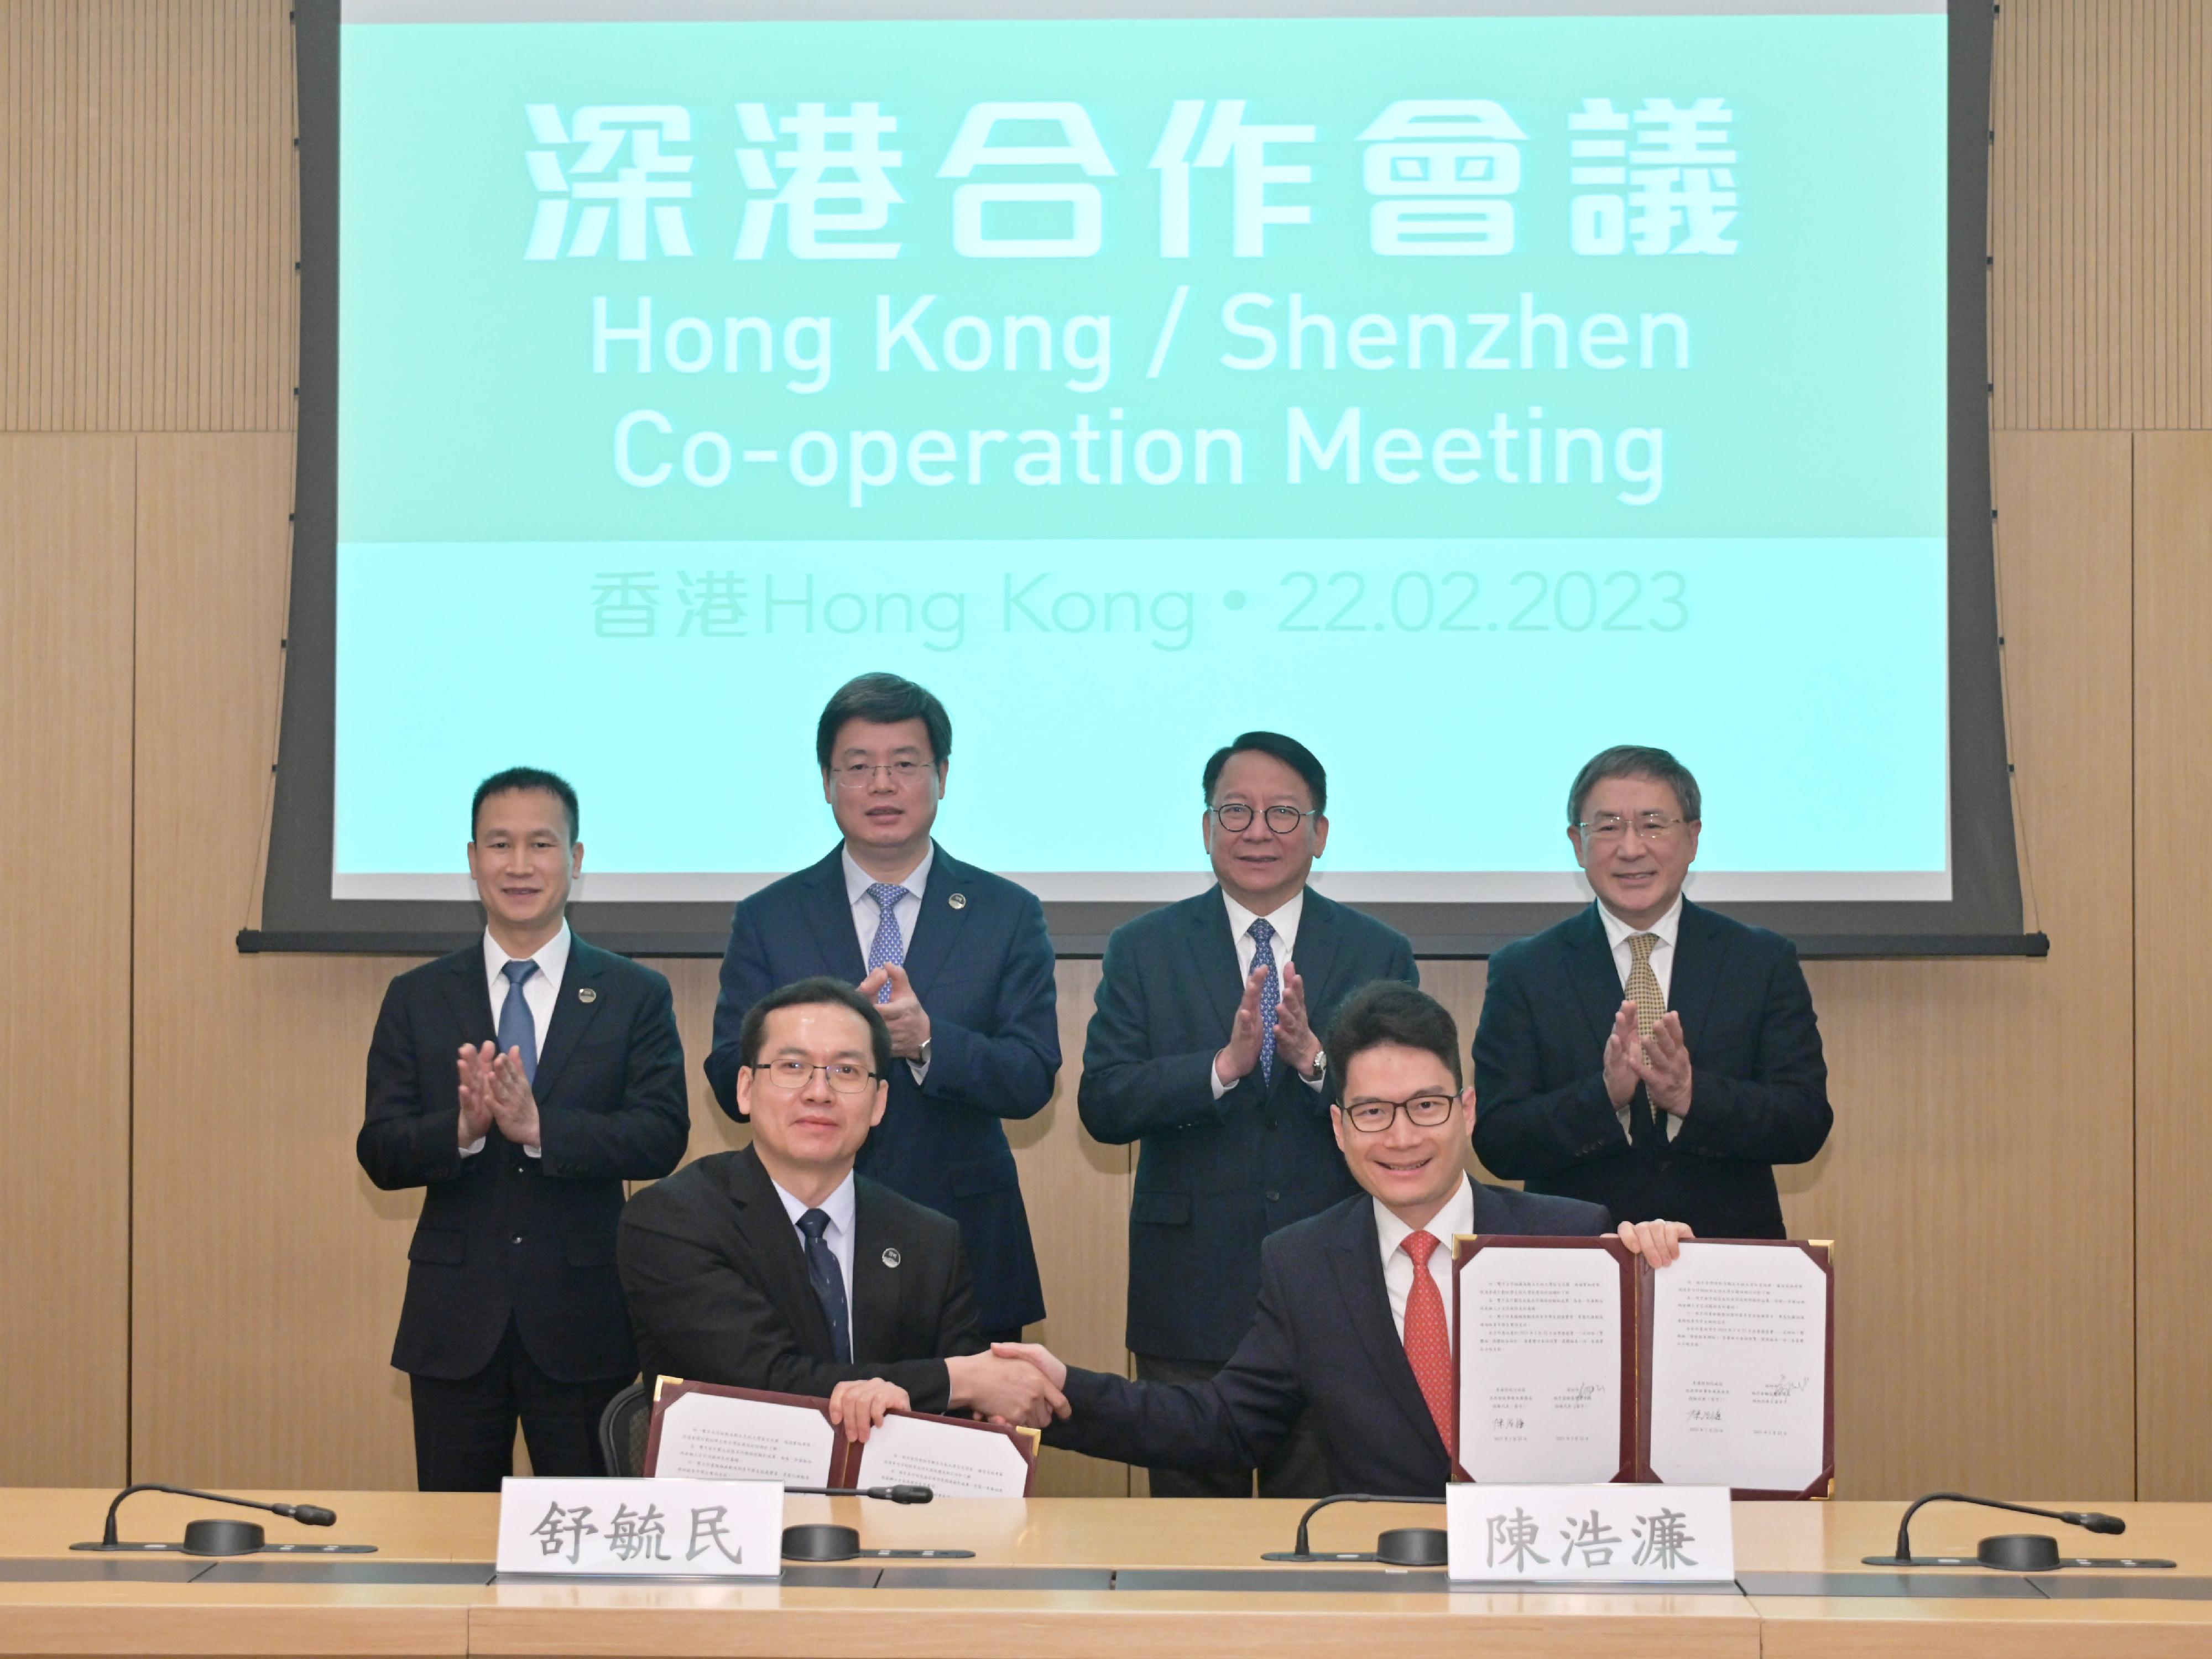 The Chief Secretary for Administration of the Government of the Hong Kong Special Administrative Region (HKSAR), Mr Chan Kwok-ki, and the Mayor of the Shenzhen Municipal Government, Mr Qin Weizhong, co-chaired the 2023 Hong Kong/Shenzhen Co-operation Meeting in Hong Kong on February 22 and witnessed the signing of three co-operation documents between Hong Kong and Shenzhen. Photo shows Mr Chan (back row, second right) and Mr Qin (back row, second left) witnessing the signing of the Letter of Intent on Hong Kong - Shenzhen Financial Institutions Youth Internship Programme between the Financial Services and the Treasury Bureau of the HKSAR Government and the Local Financial Regulatory Bureau of Shenzhen Municipality.